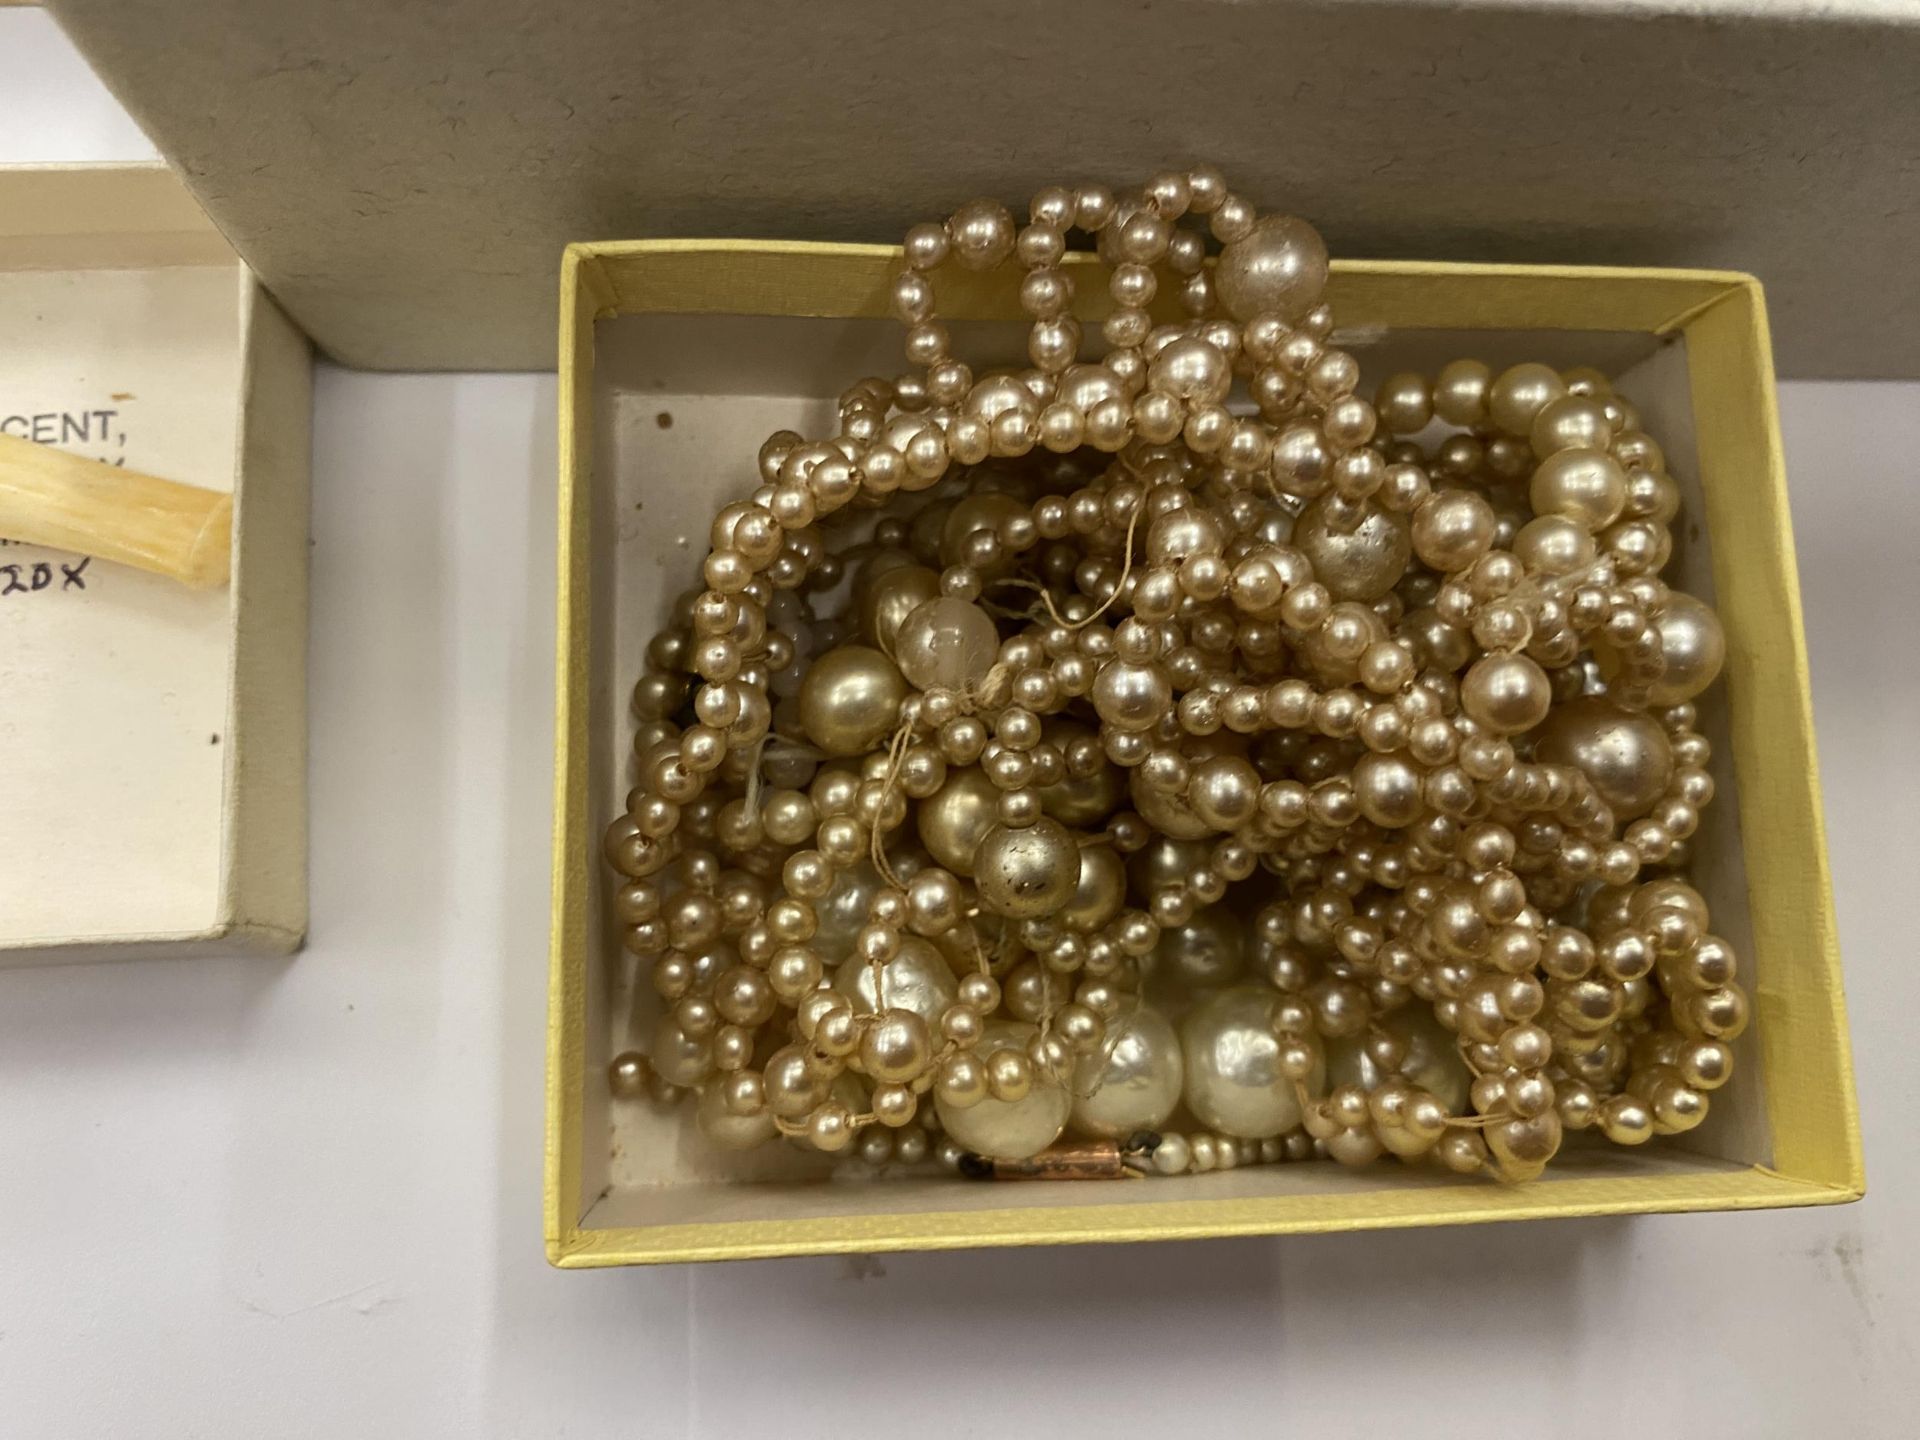 A COLLECTION OF VINTAGE COSTUME JEWELLERY AND FURTHER ITEMS, PEARL NECKLACES, PASTE JEWELLERY ETC - Image 2 of 5